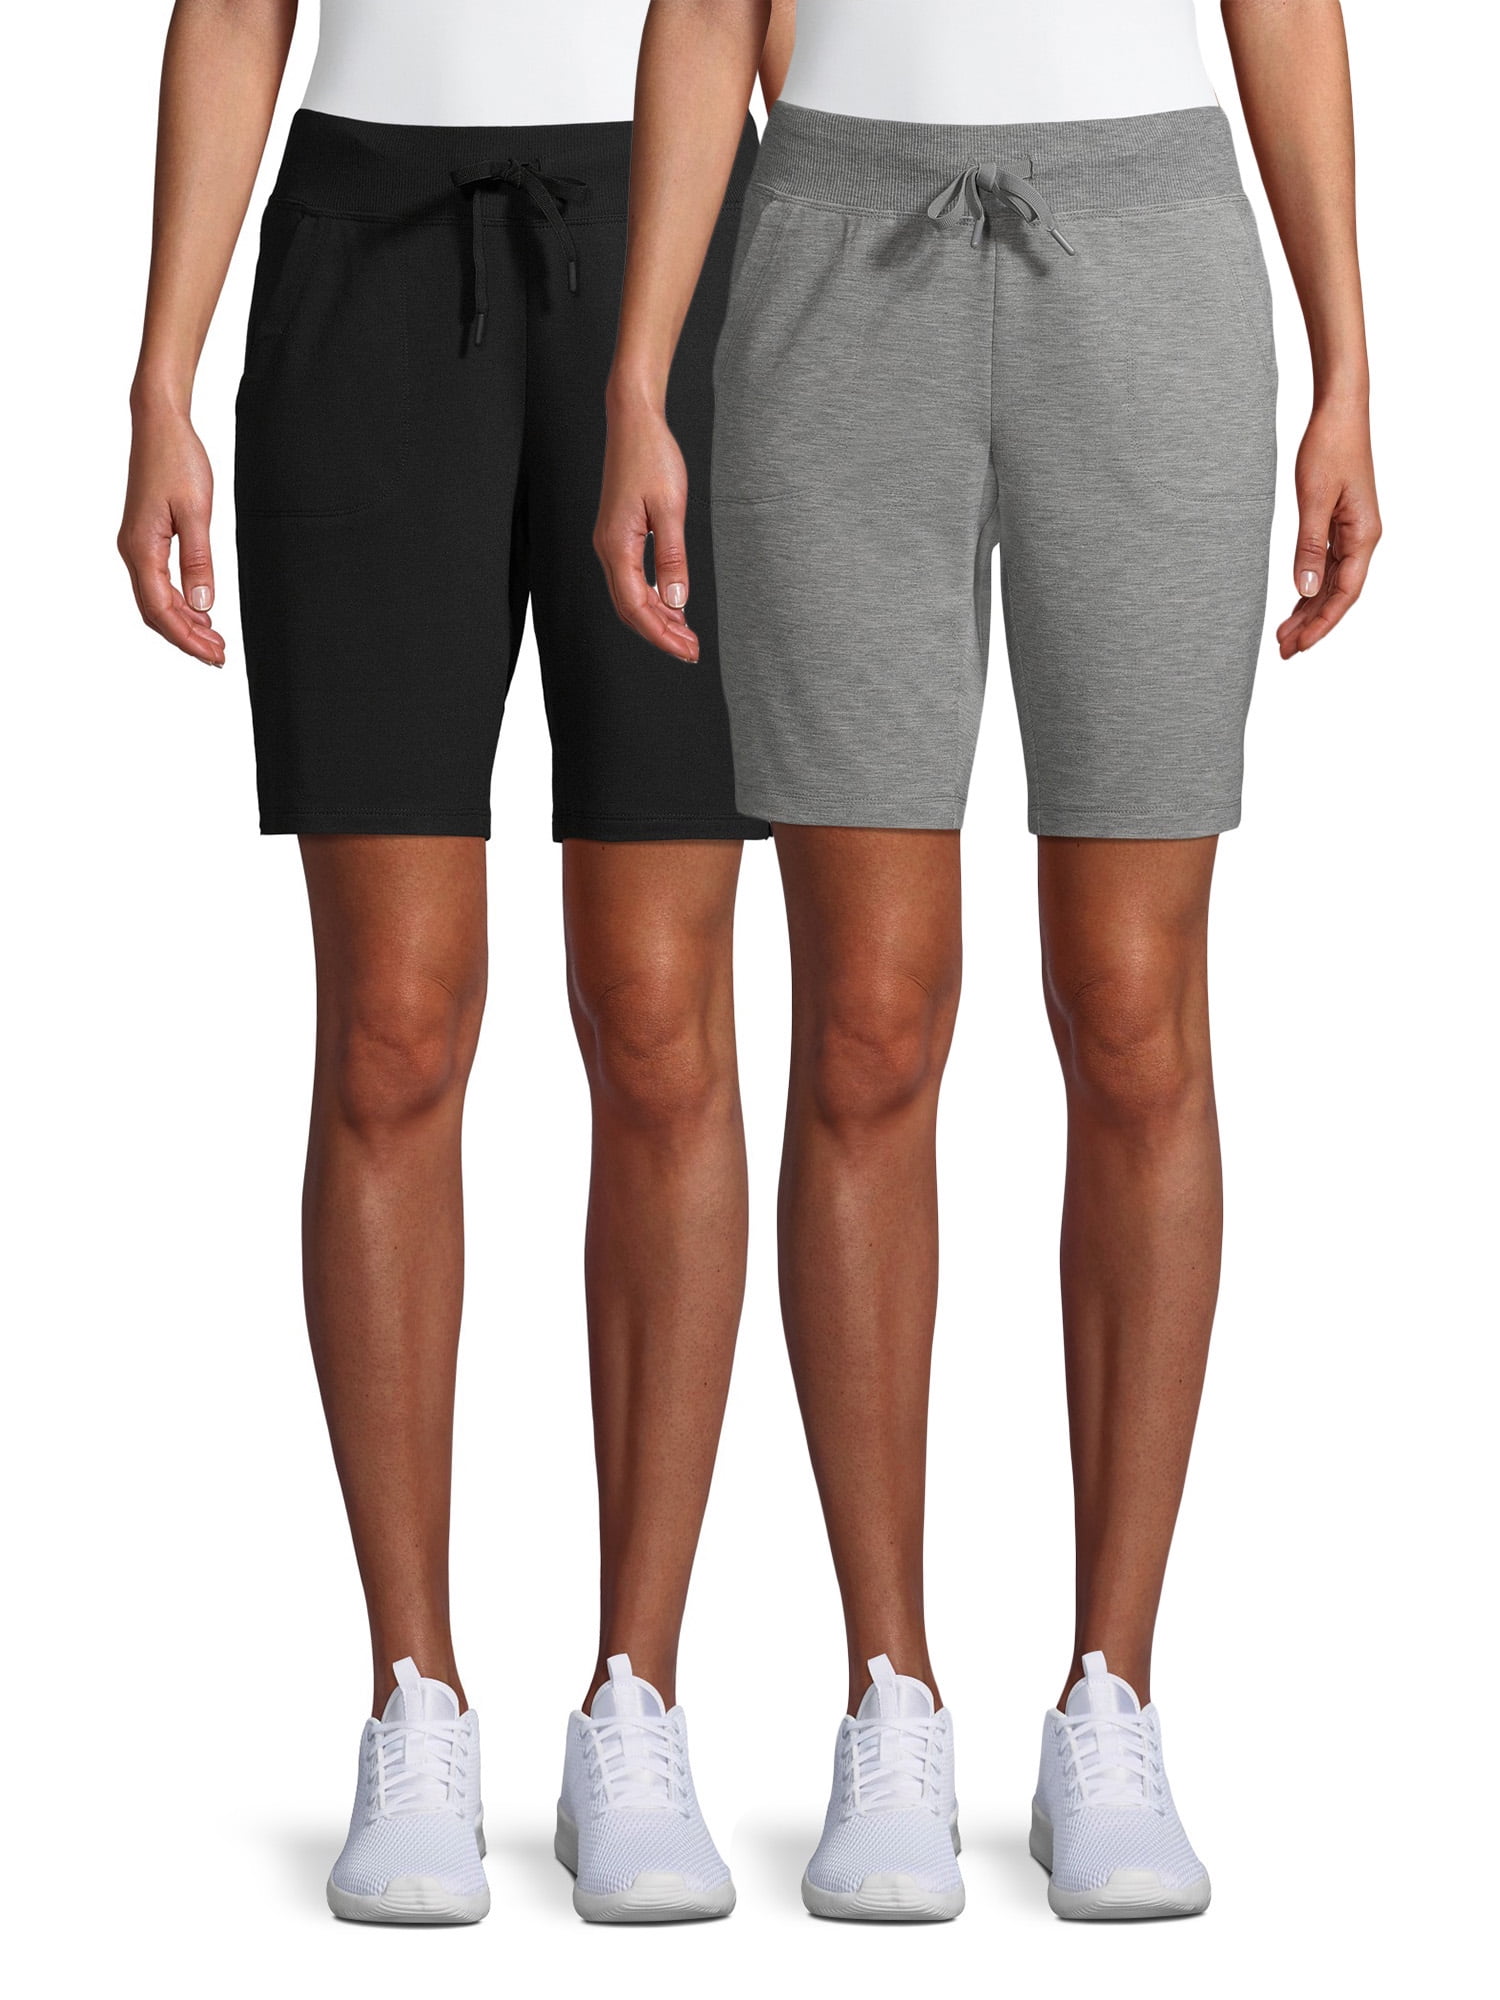 Women S Athletic Shorts Brands